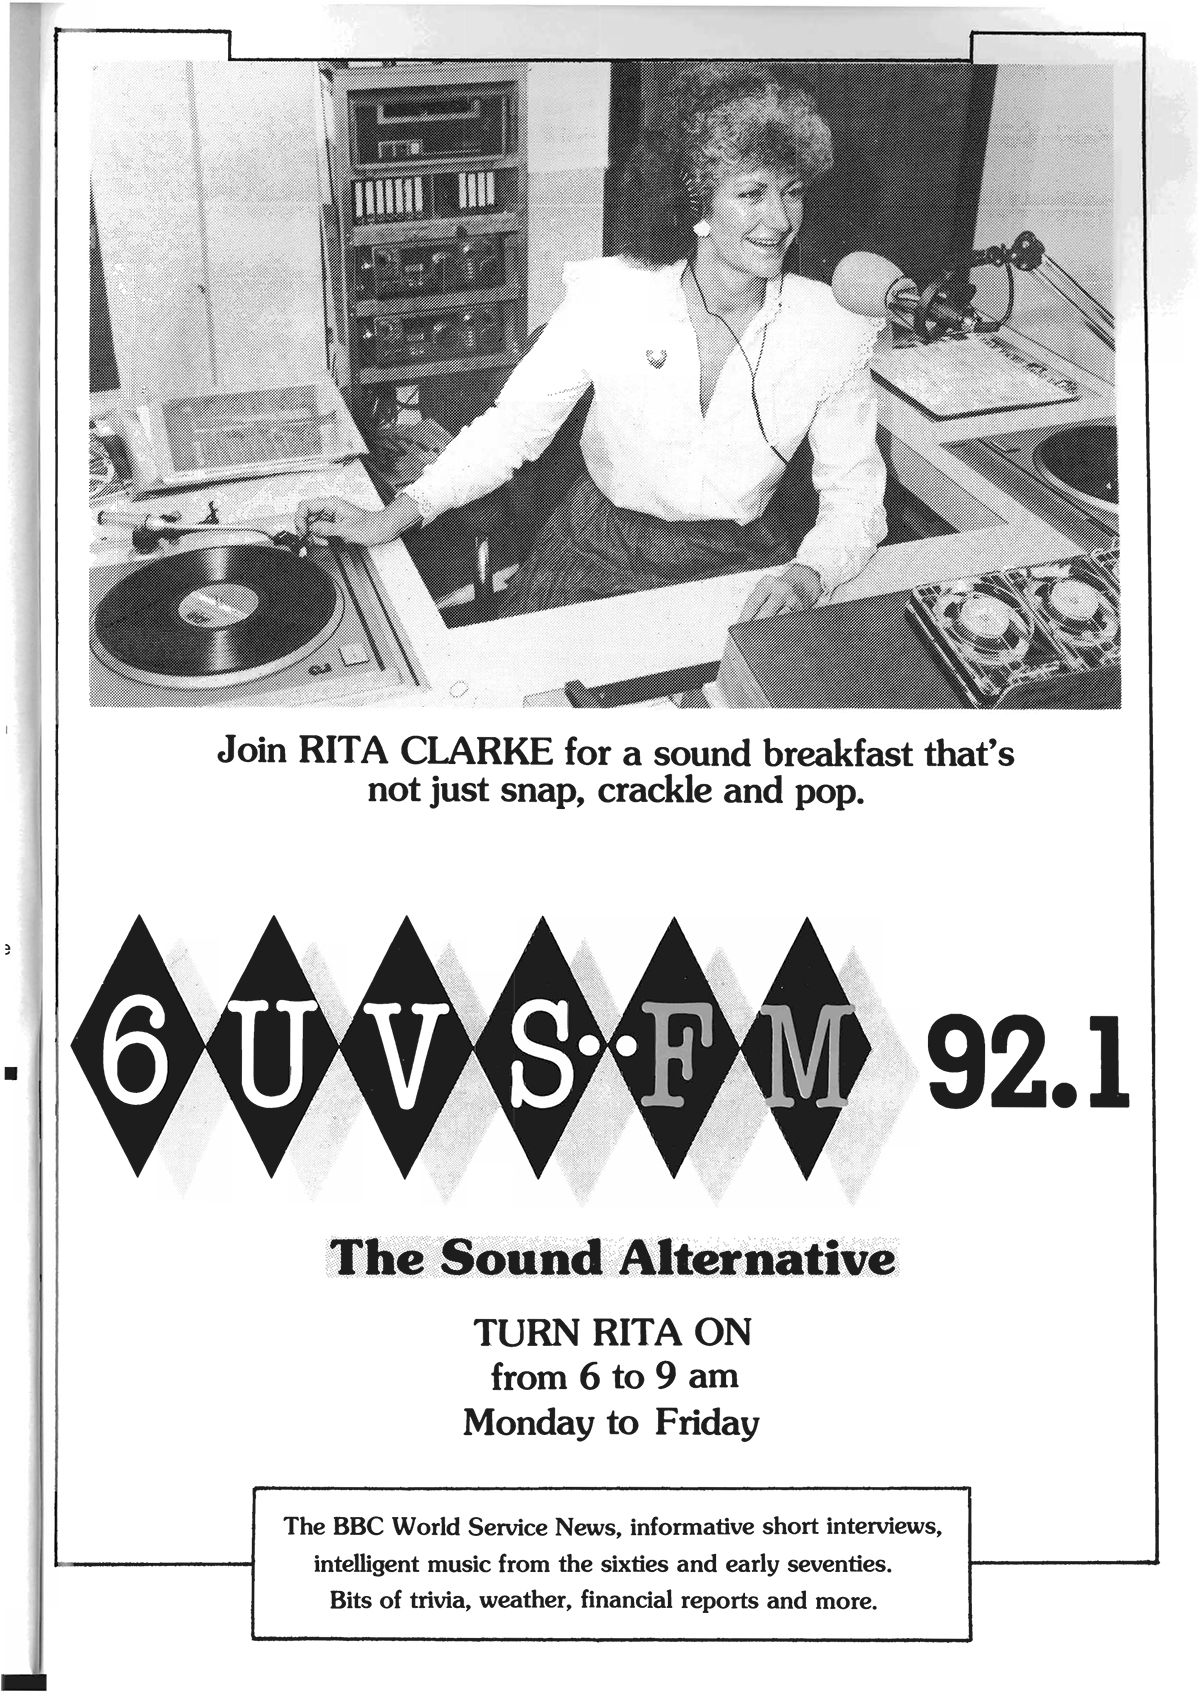 A black and white poster advertising the radio station 6UVSFM 92.1 and depicting a photograph of a woman at a radio station and text below that reads 'Join Rita Clarke for a sound breakfast that's not just snap, crackle and pop.'